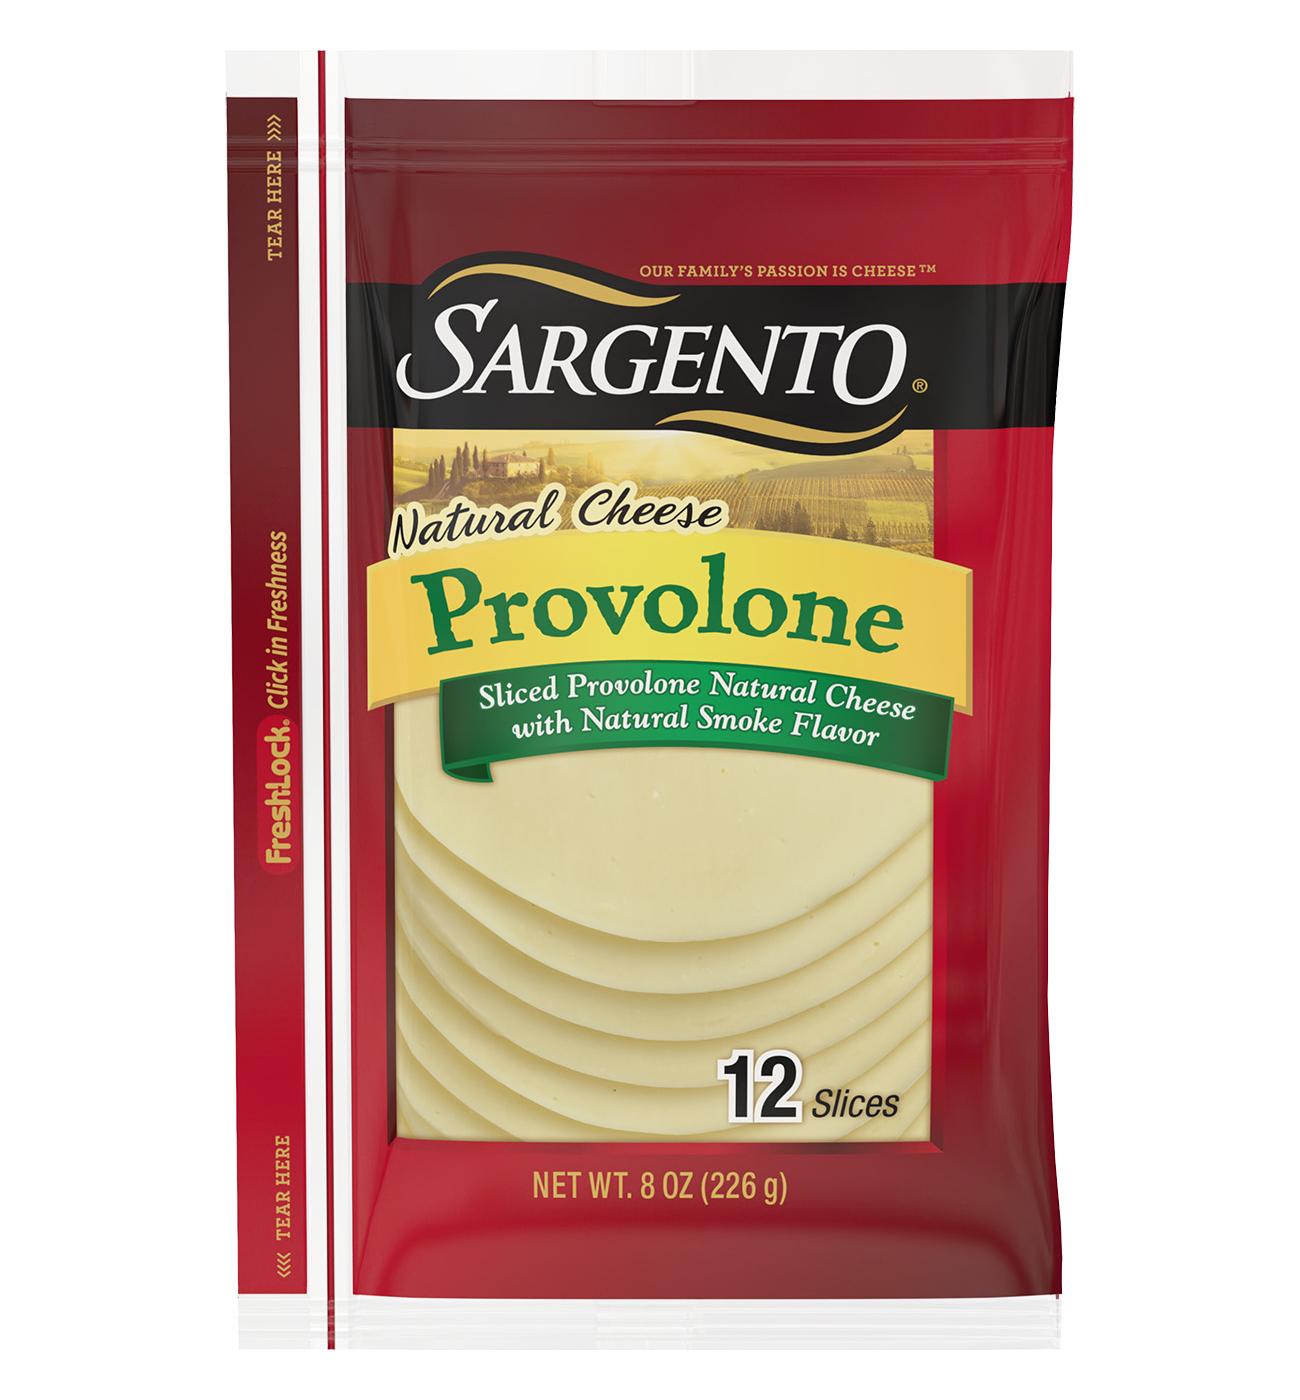 SARGENTO Provolone with Smoke Flavor Sliced Cheese; image 1 of 2